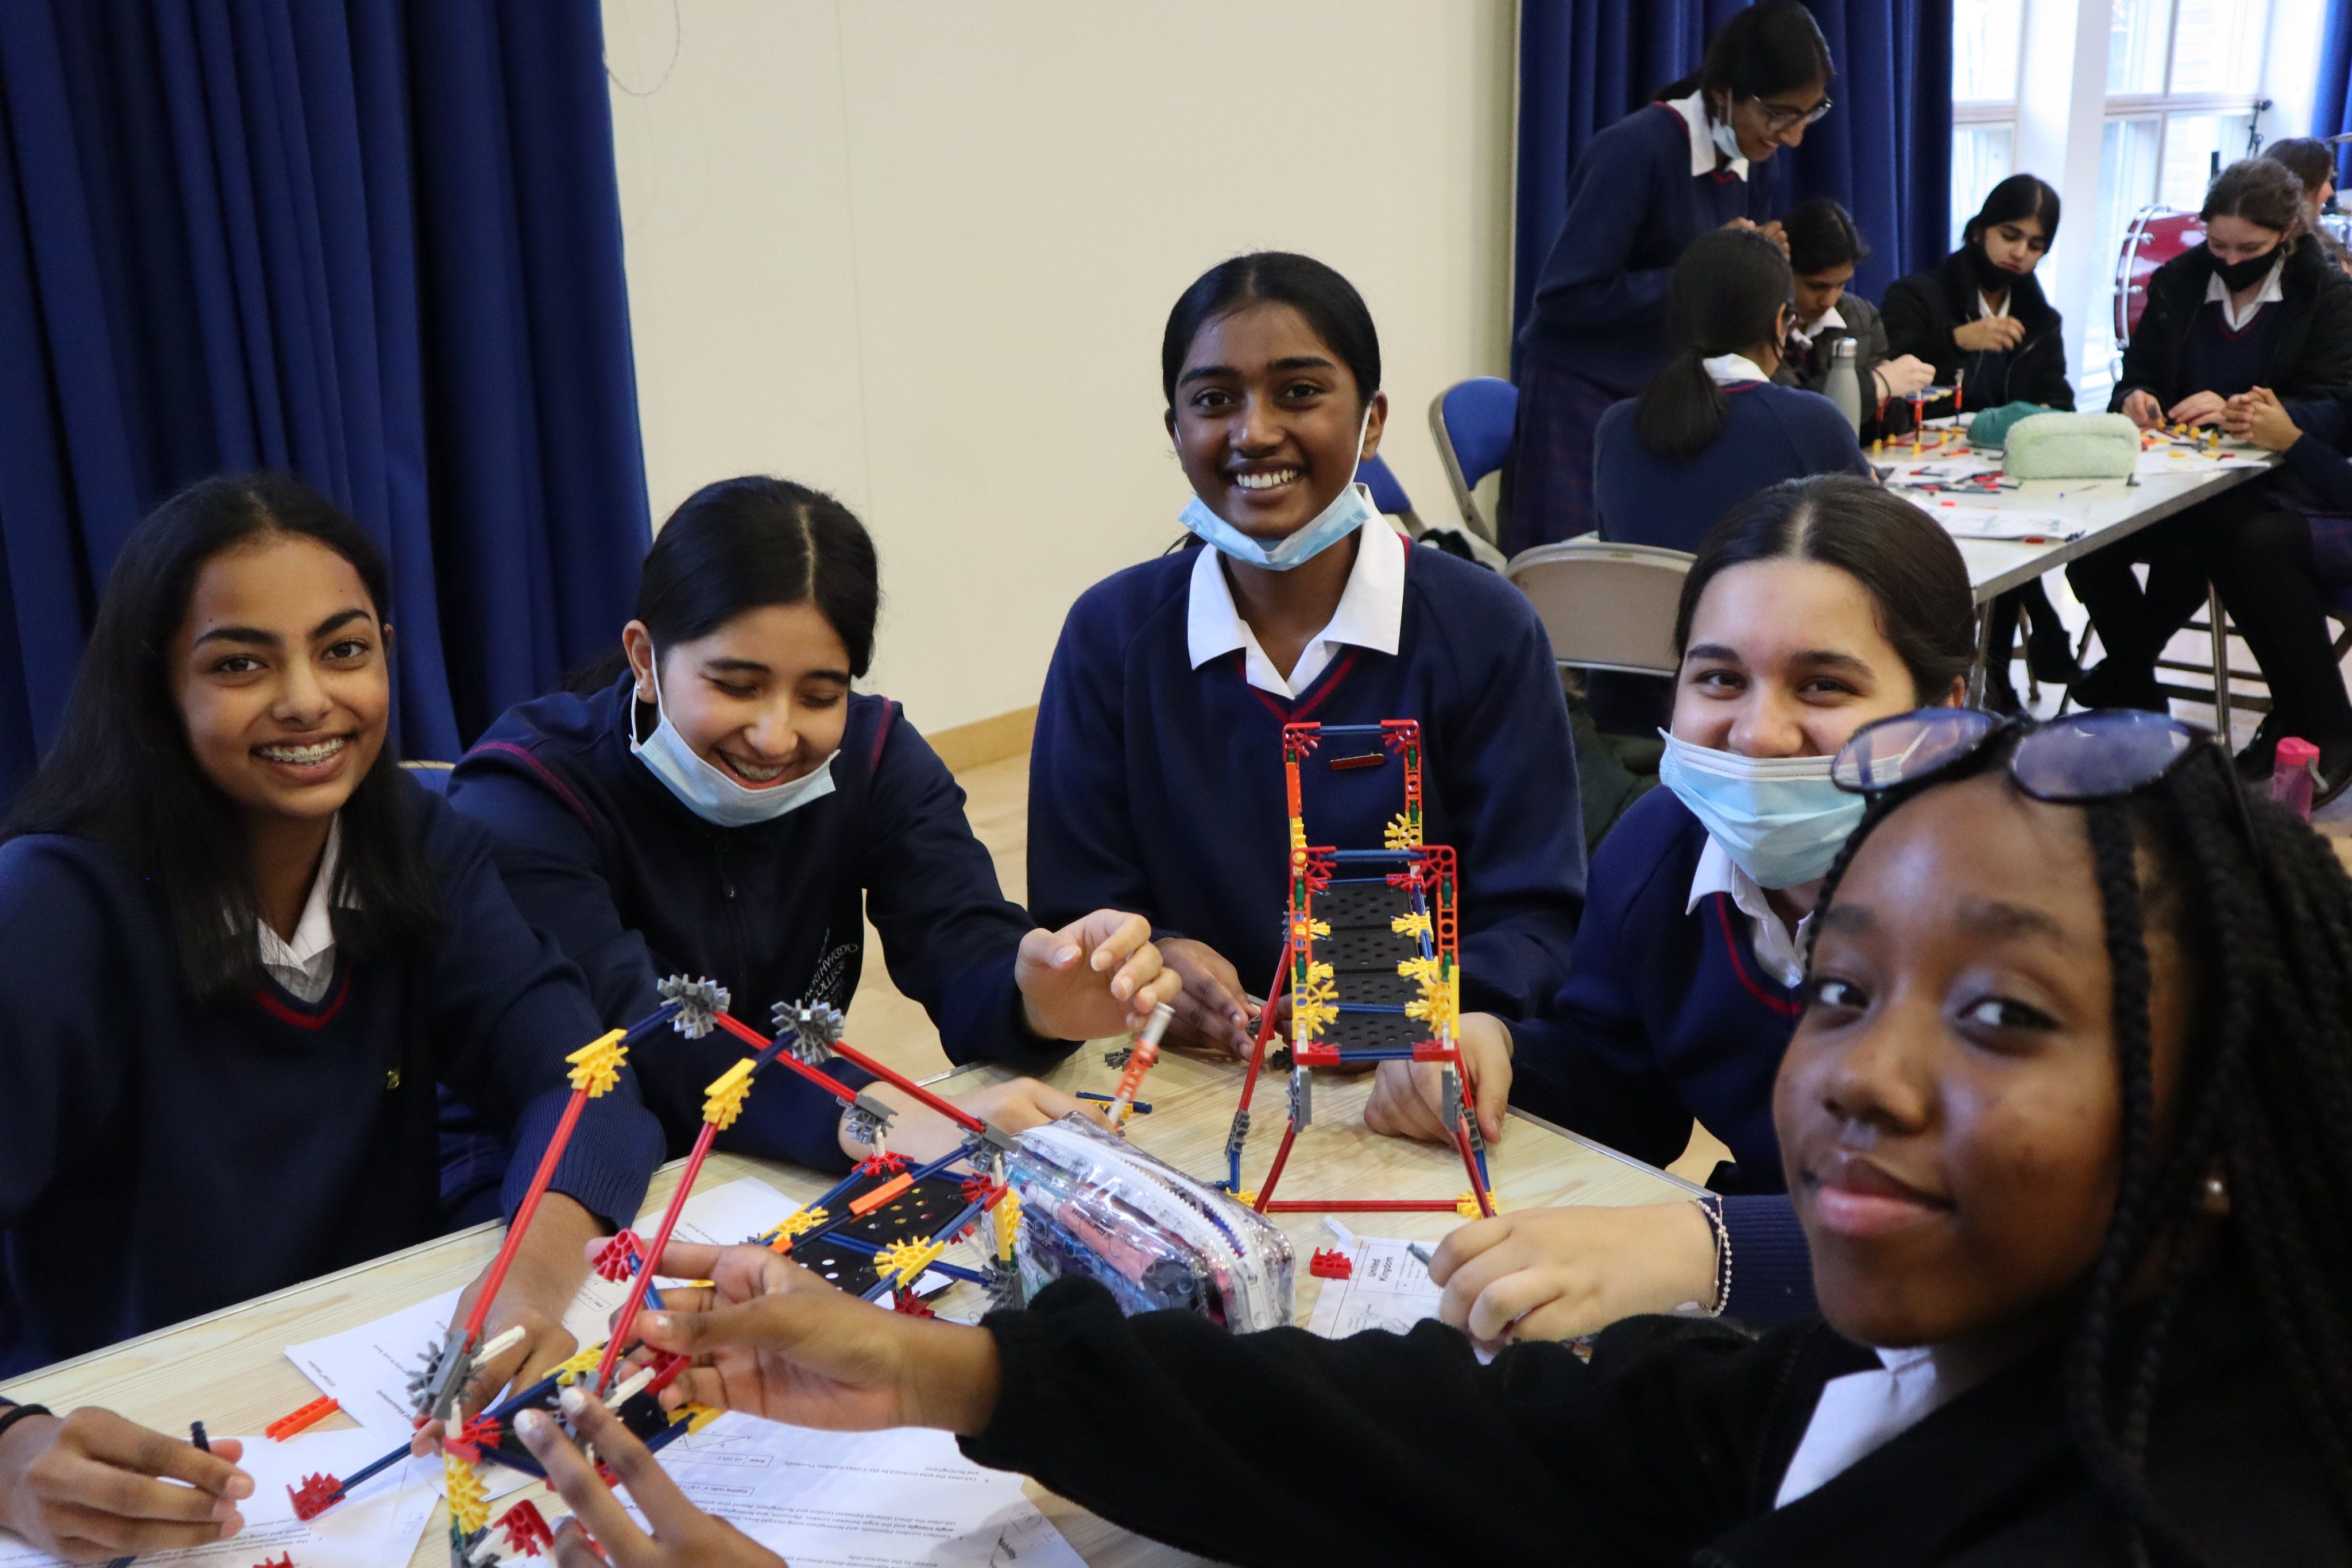 Students Bridge Building with Maths